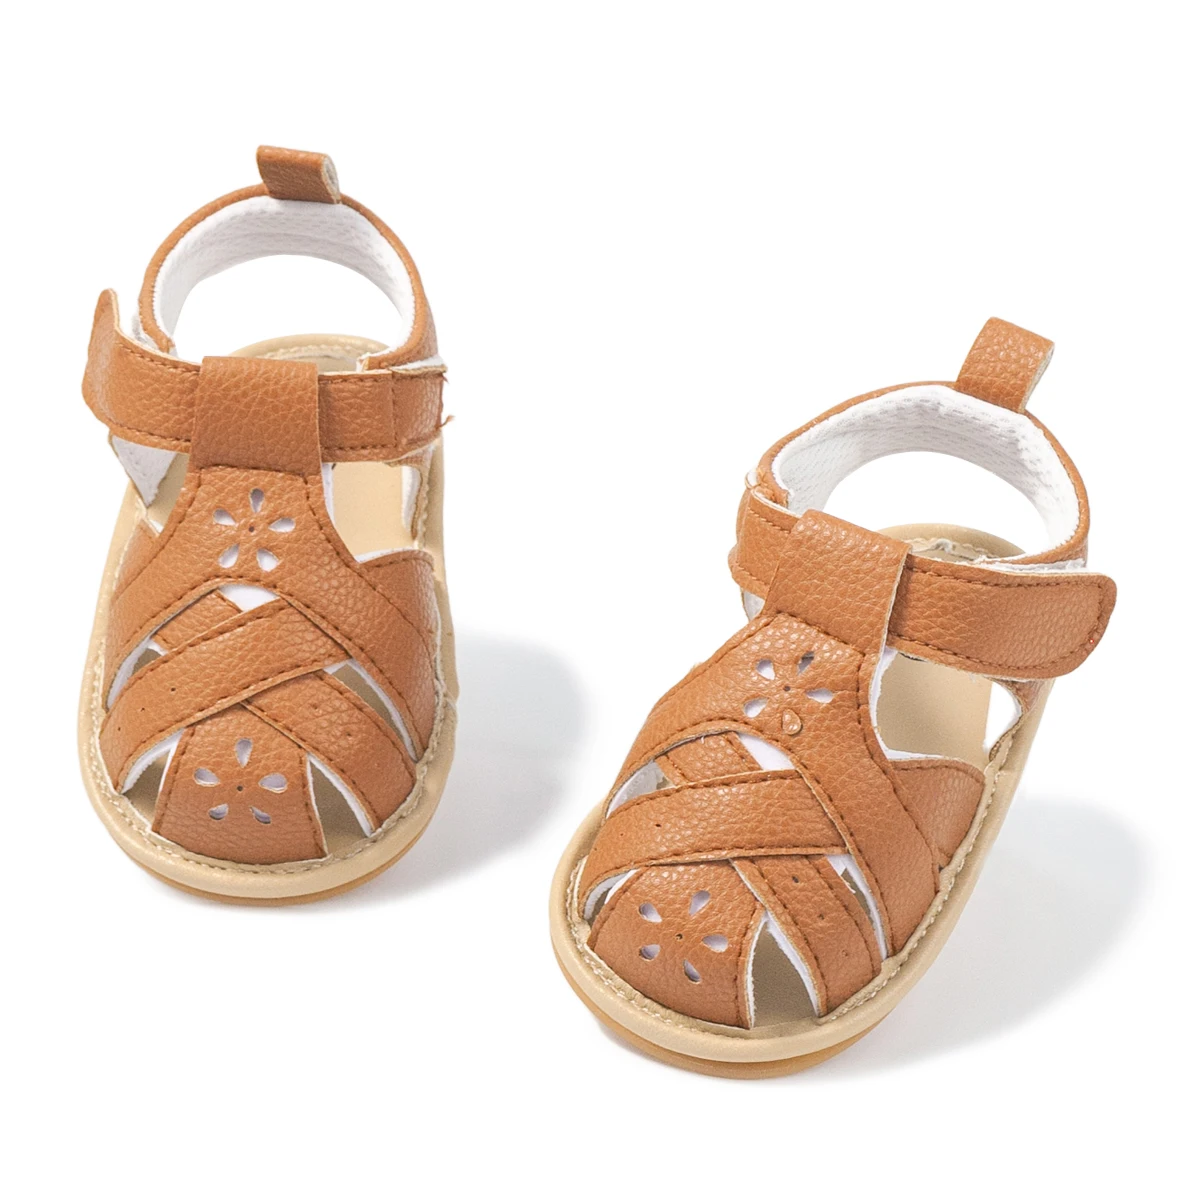 High Quality  outdoor infant baby  Girls and boys Summer Shoes  rubber soft sole  PU leather fabric  baby sandals